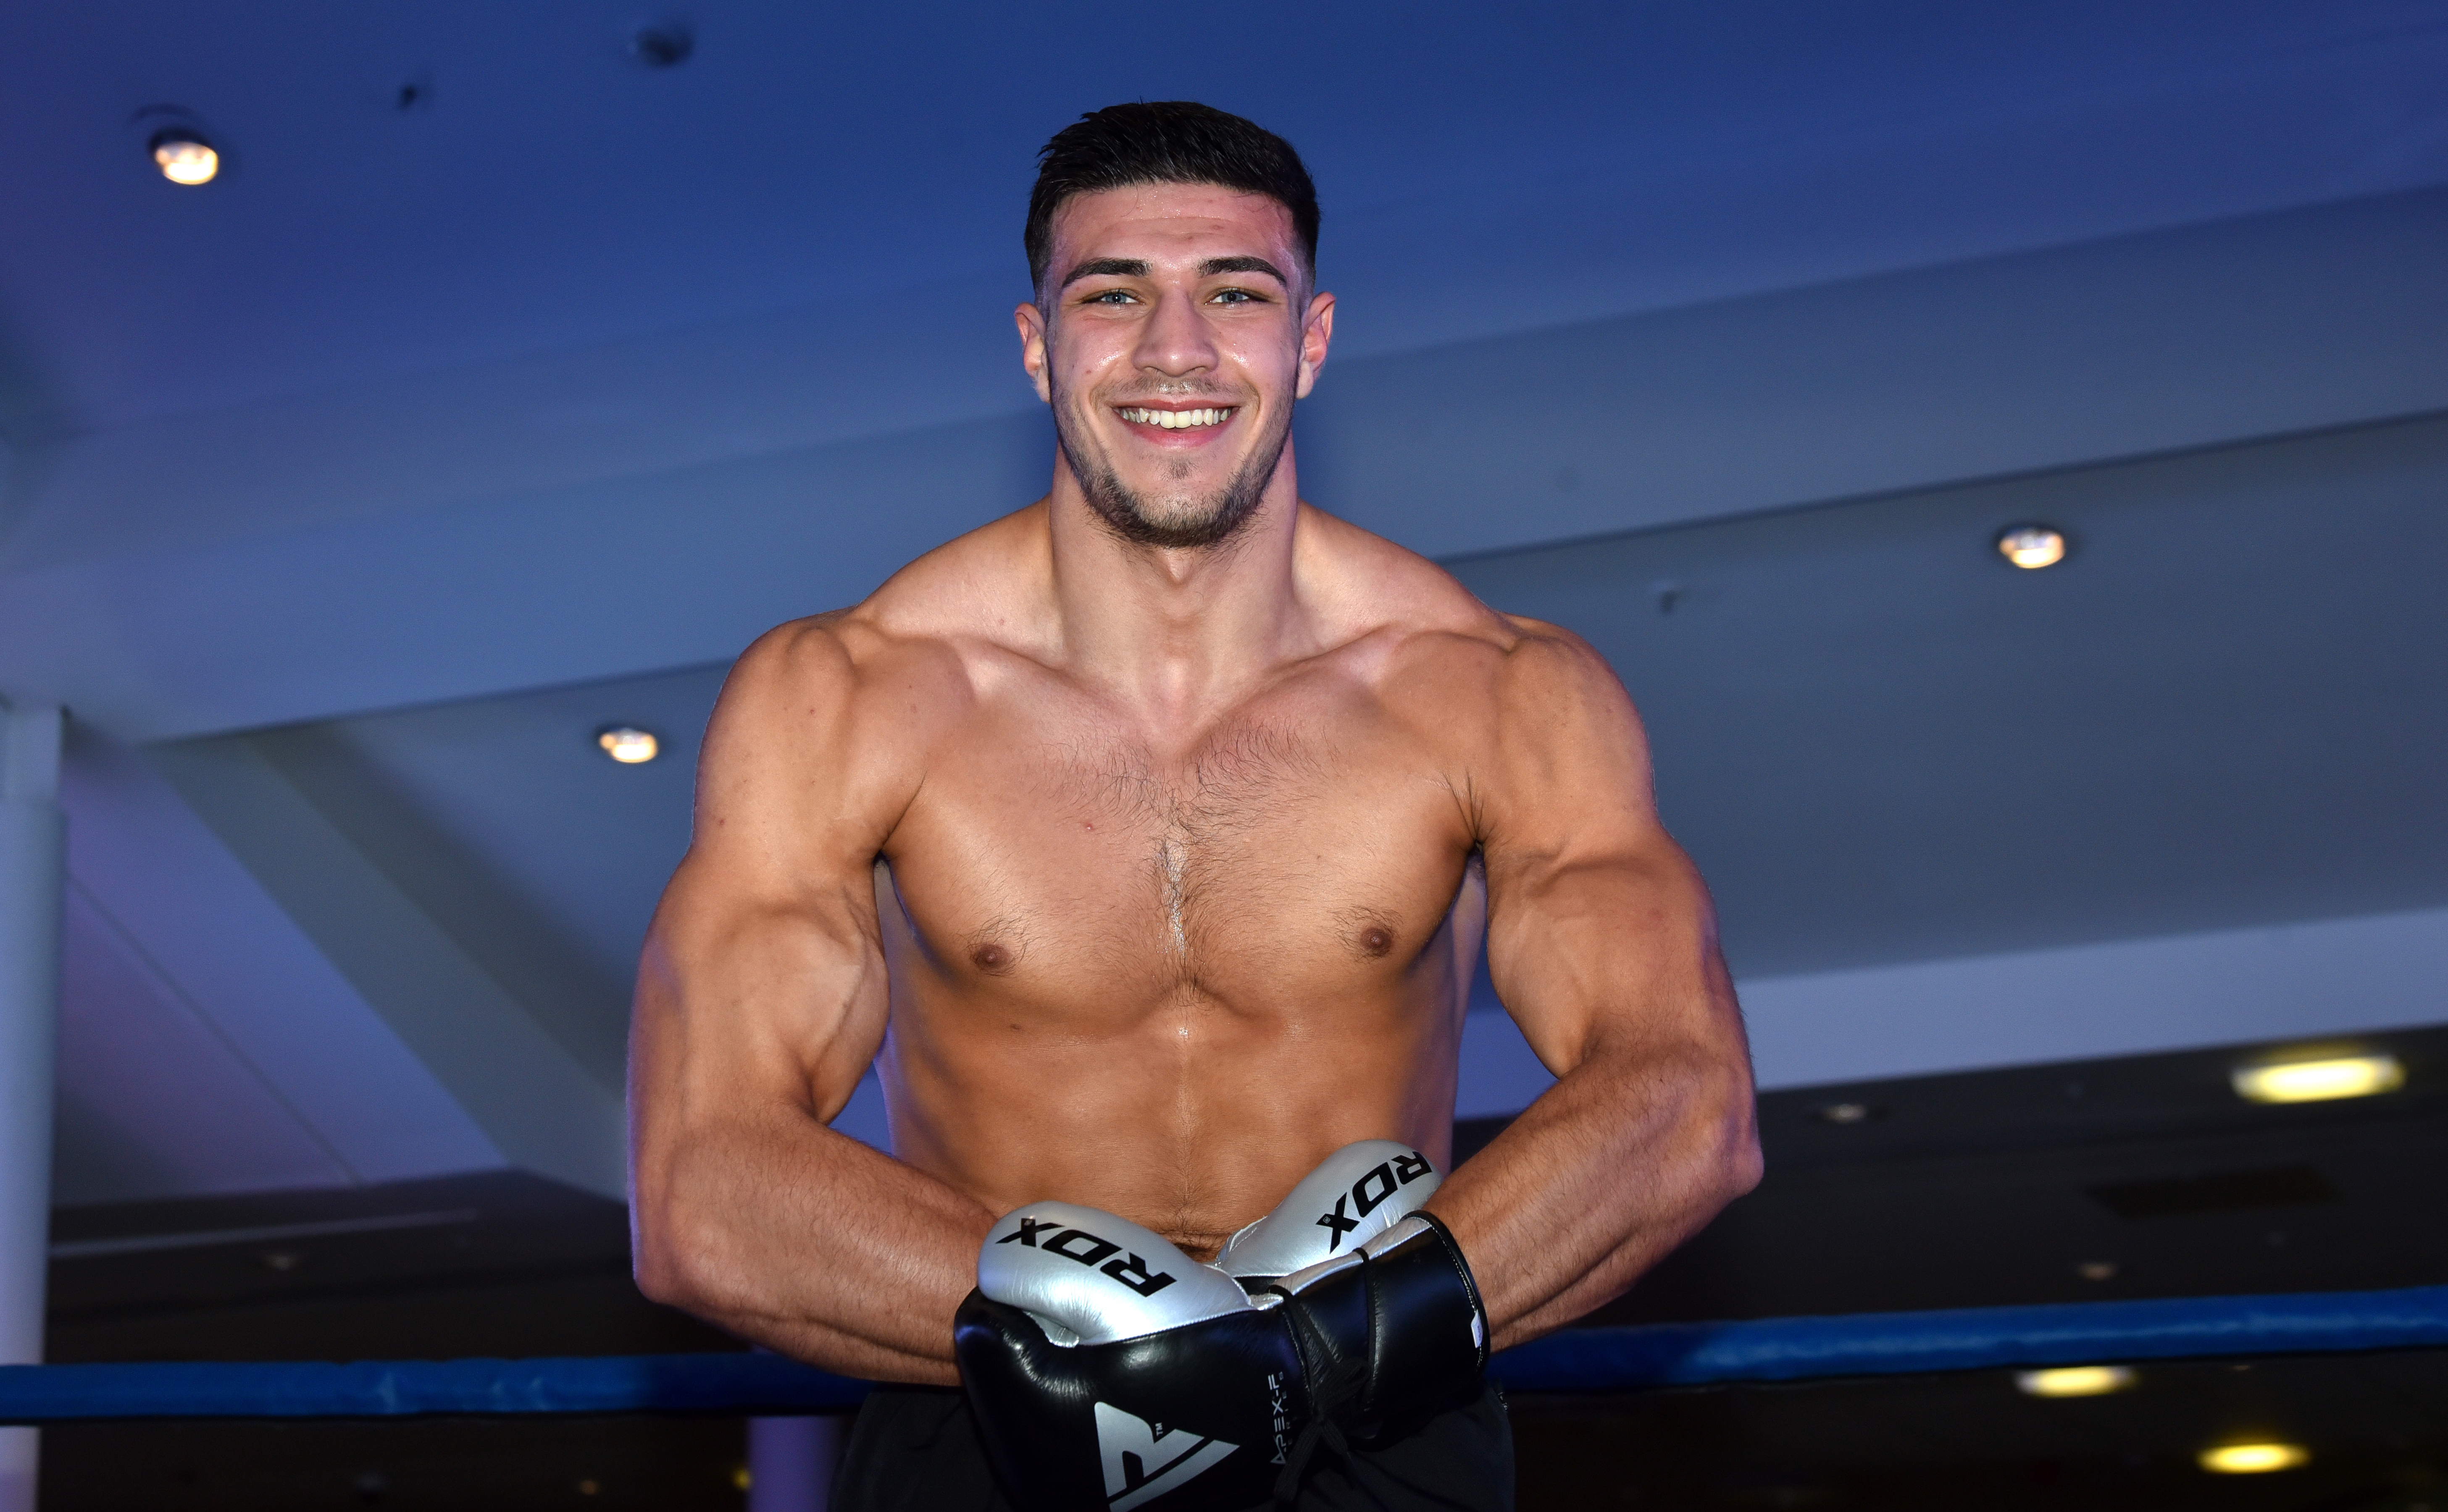 Tommy Fury, younger brother of Tyson, set to appear on reality show